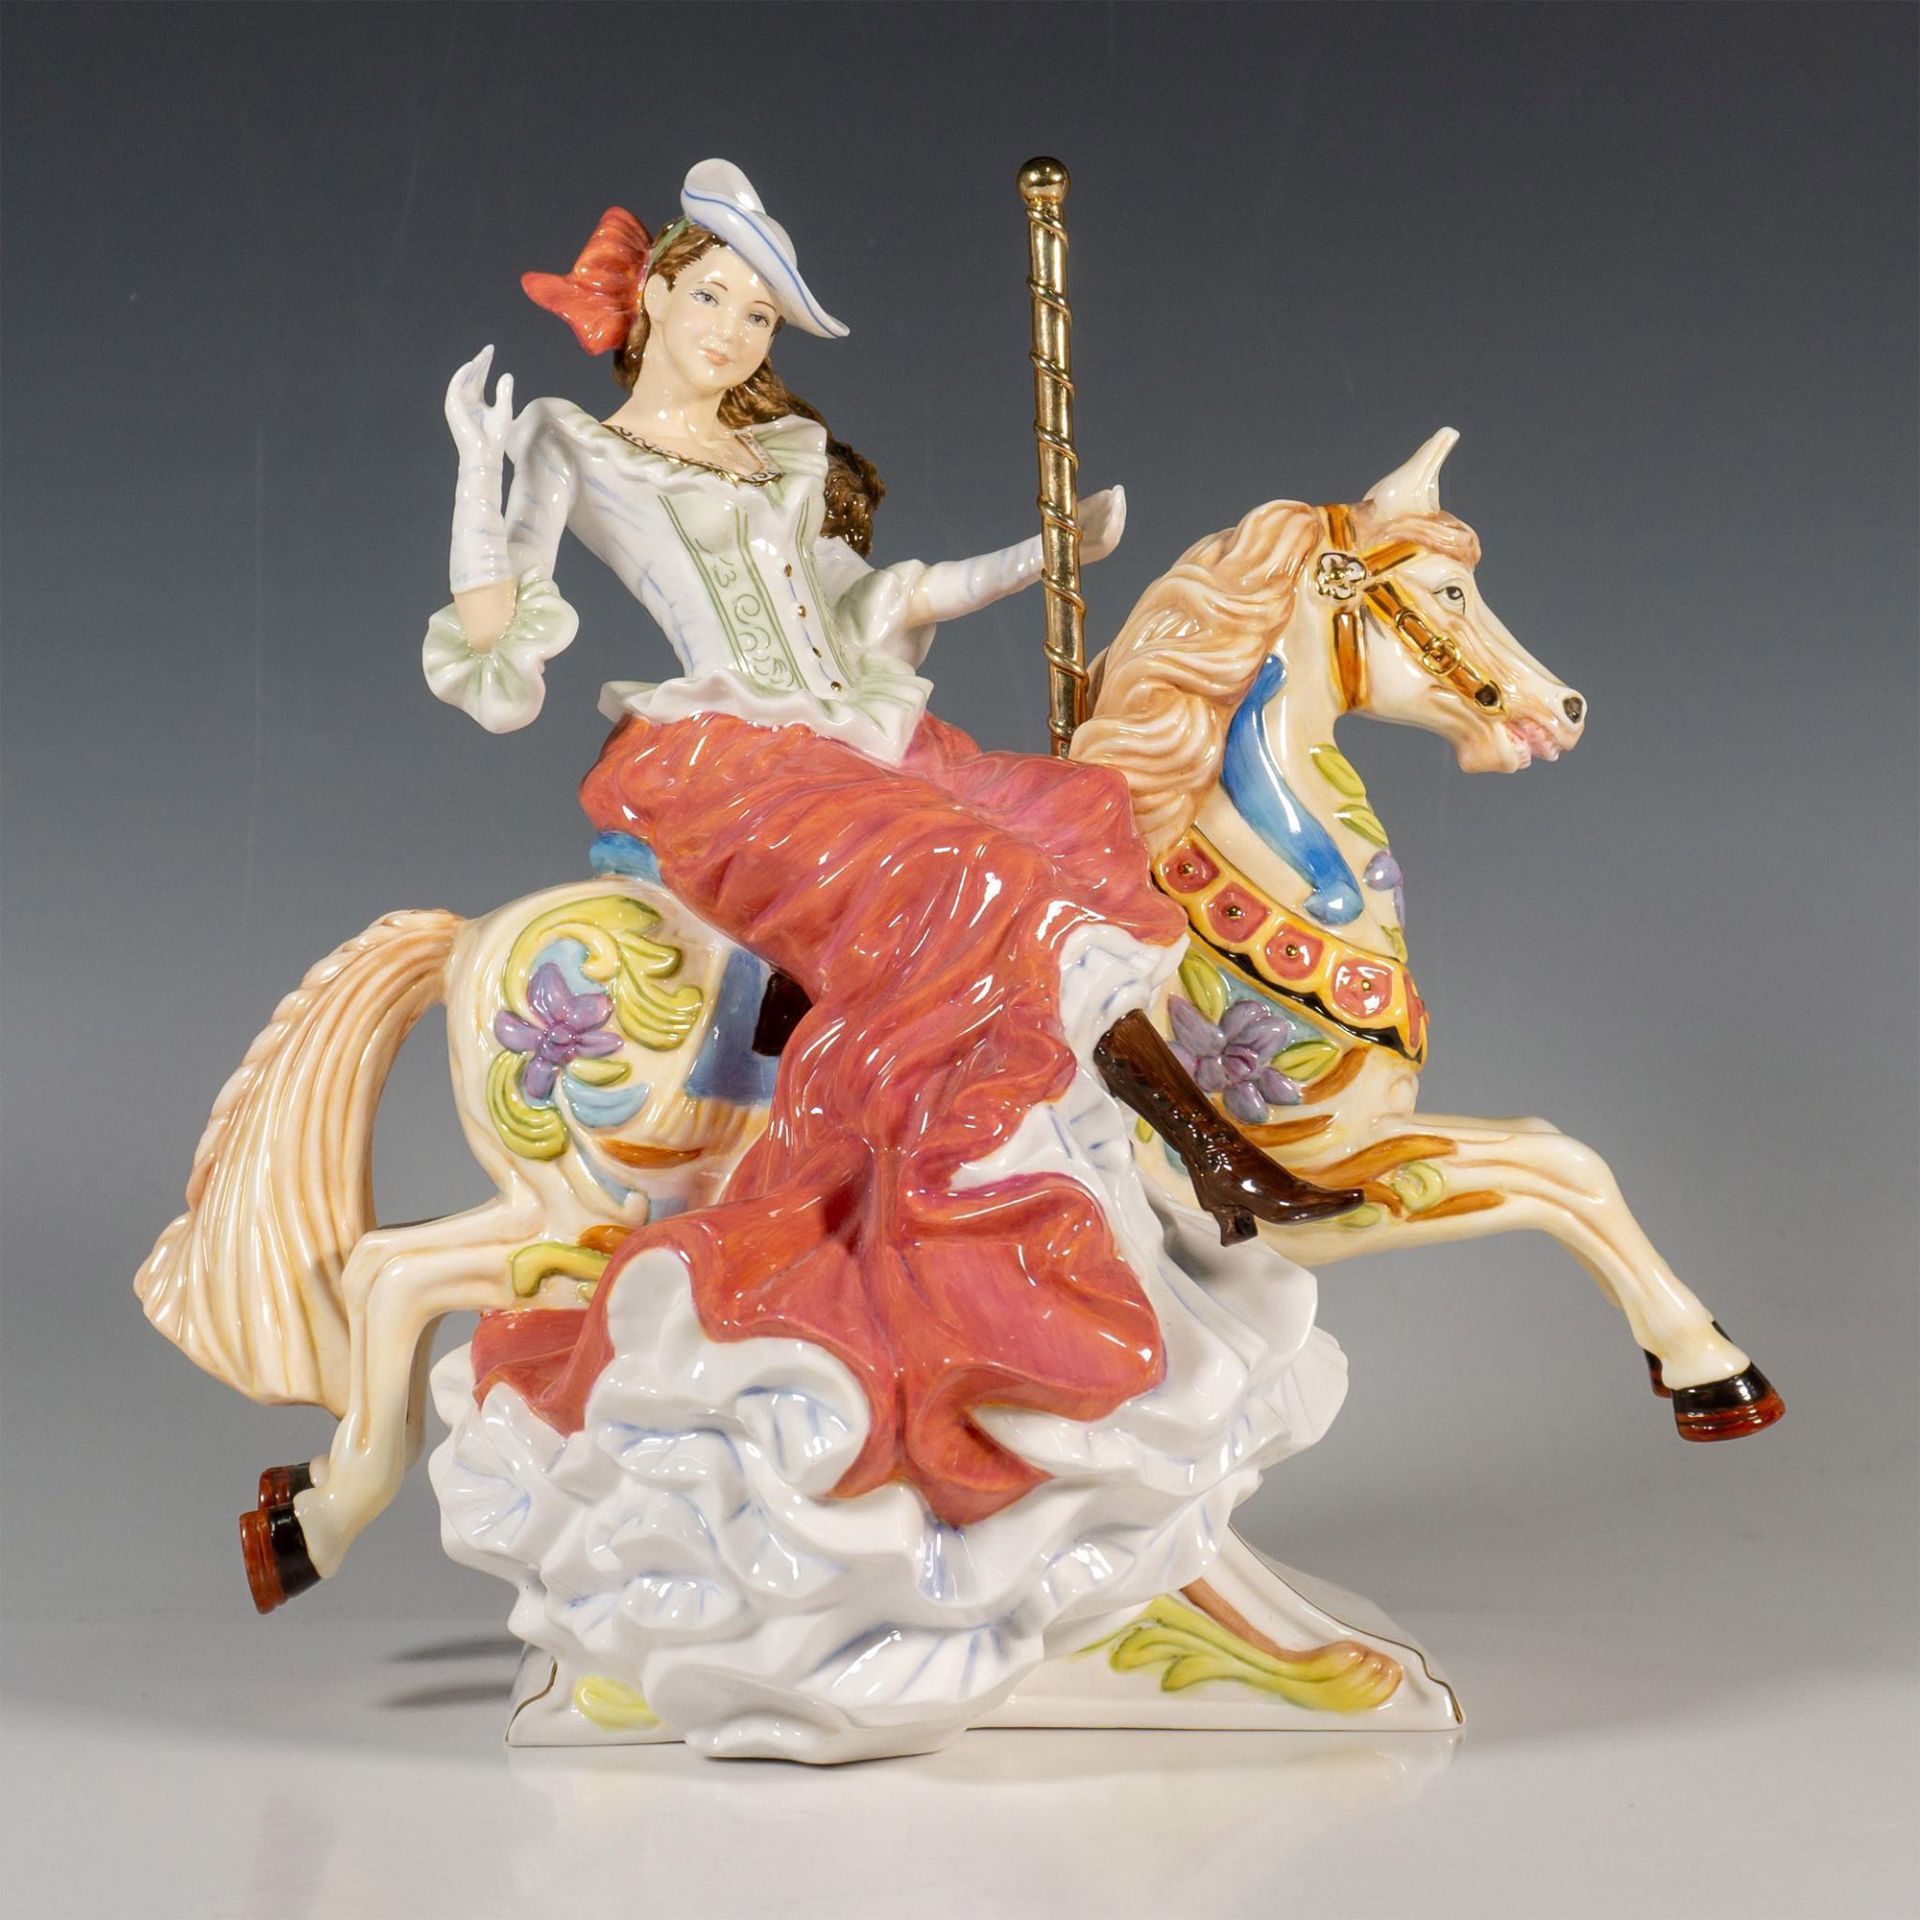 The English Ladies Porcelain Figurine, Carousel Collection